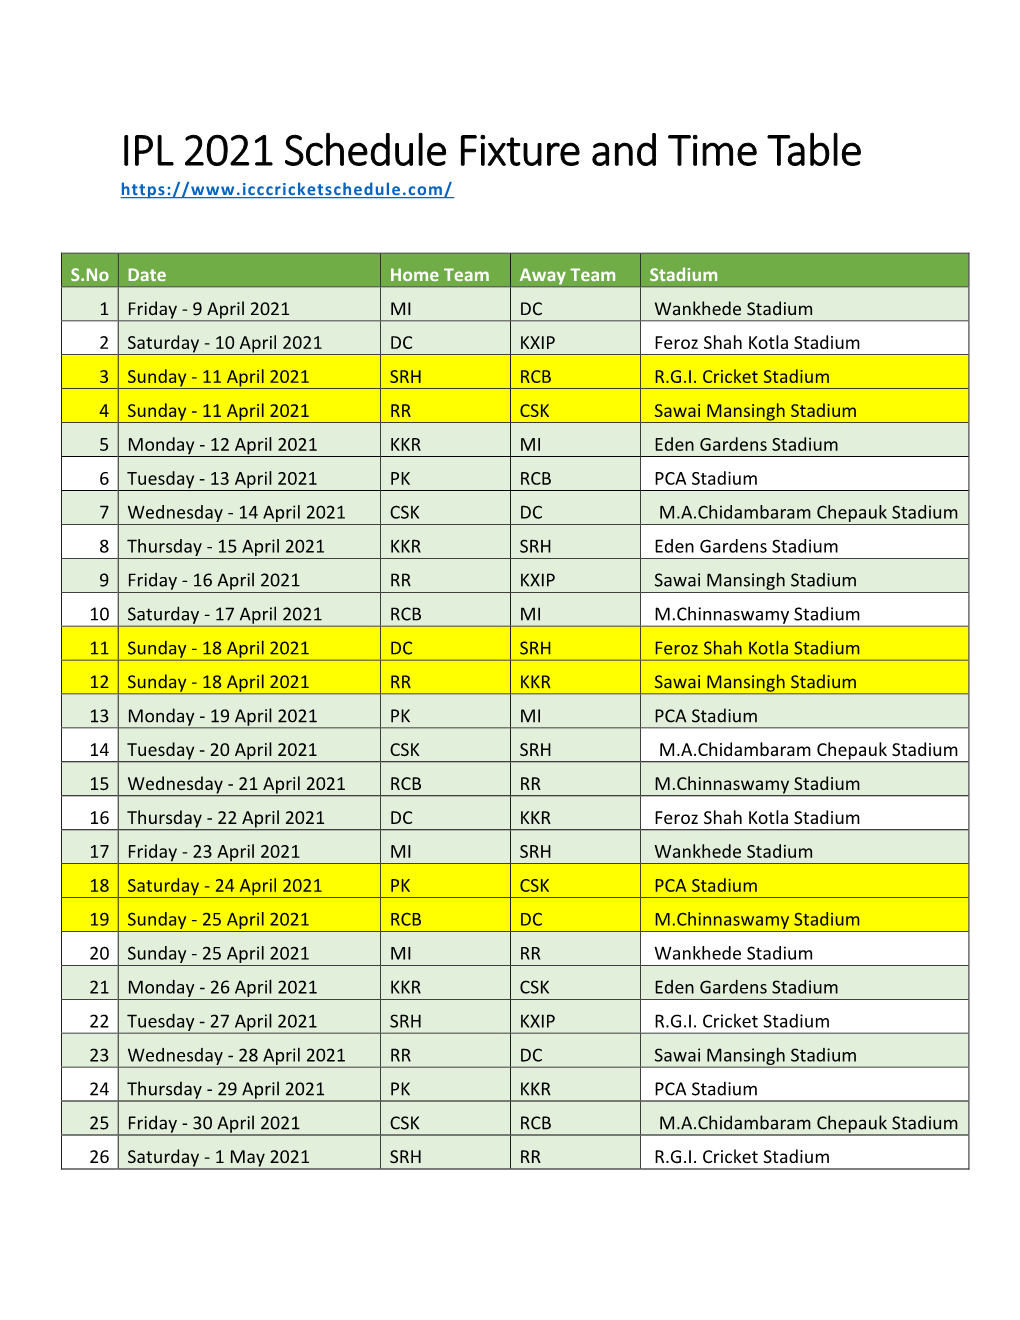 IPL 2021 Schedule Fixture and Time Table